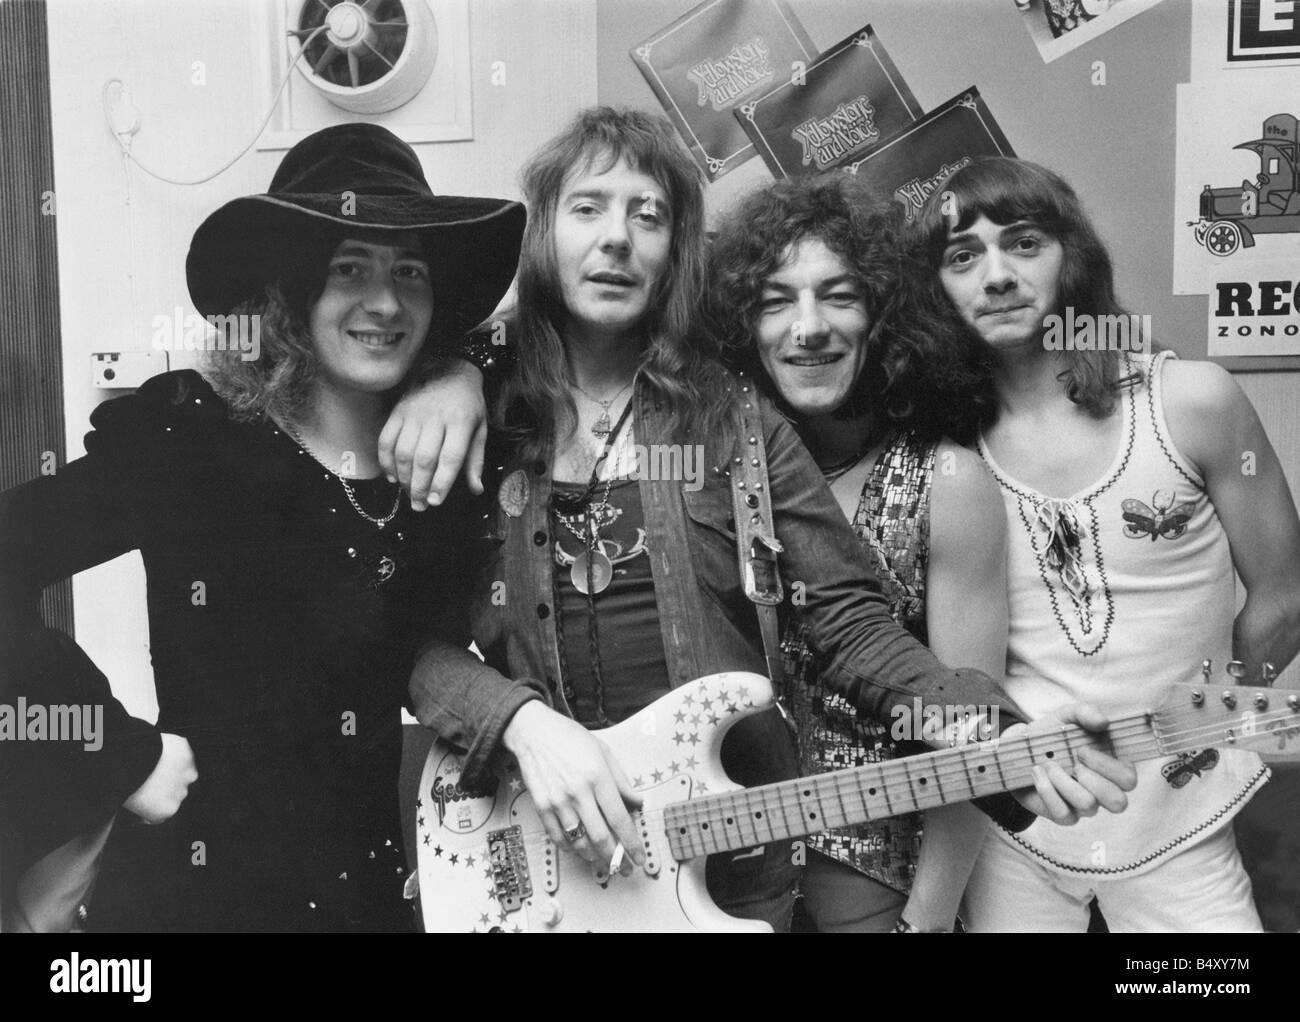 Geordie the former band of Brian Johnson lead singer of the rock group AC DC Left to right Tom Hill Vic Malcolm Brian Johnson Brian Gibson 10 10 72 Stock Photo